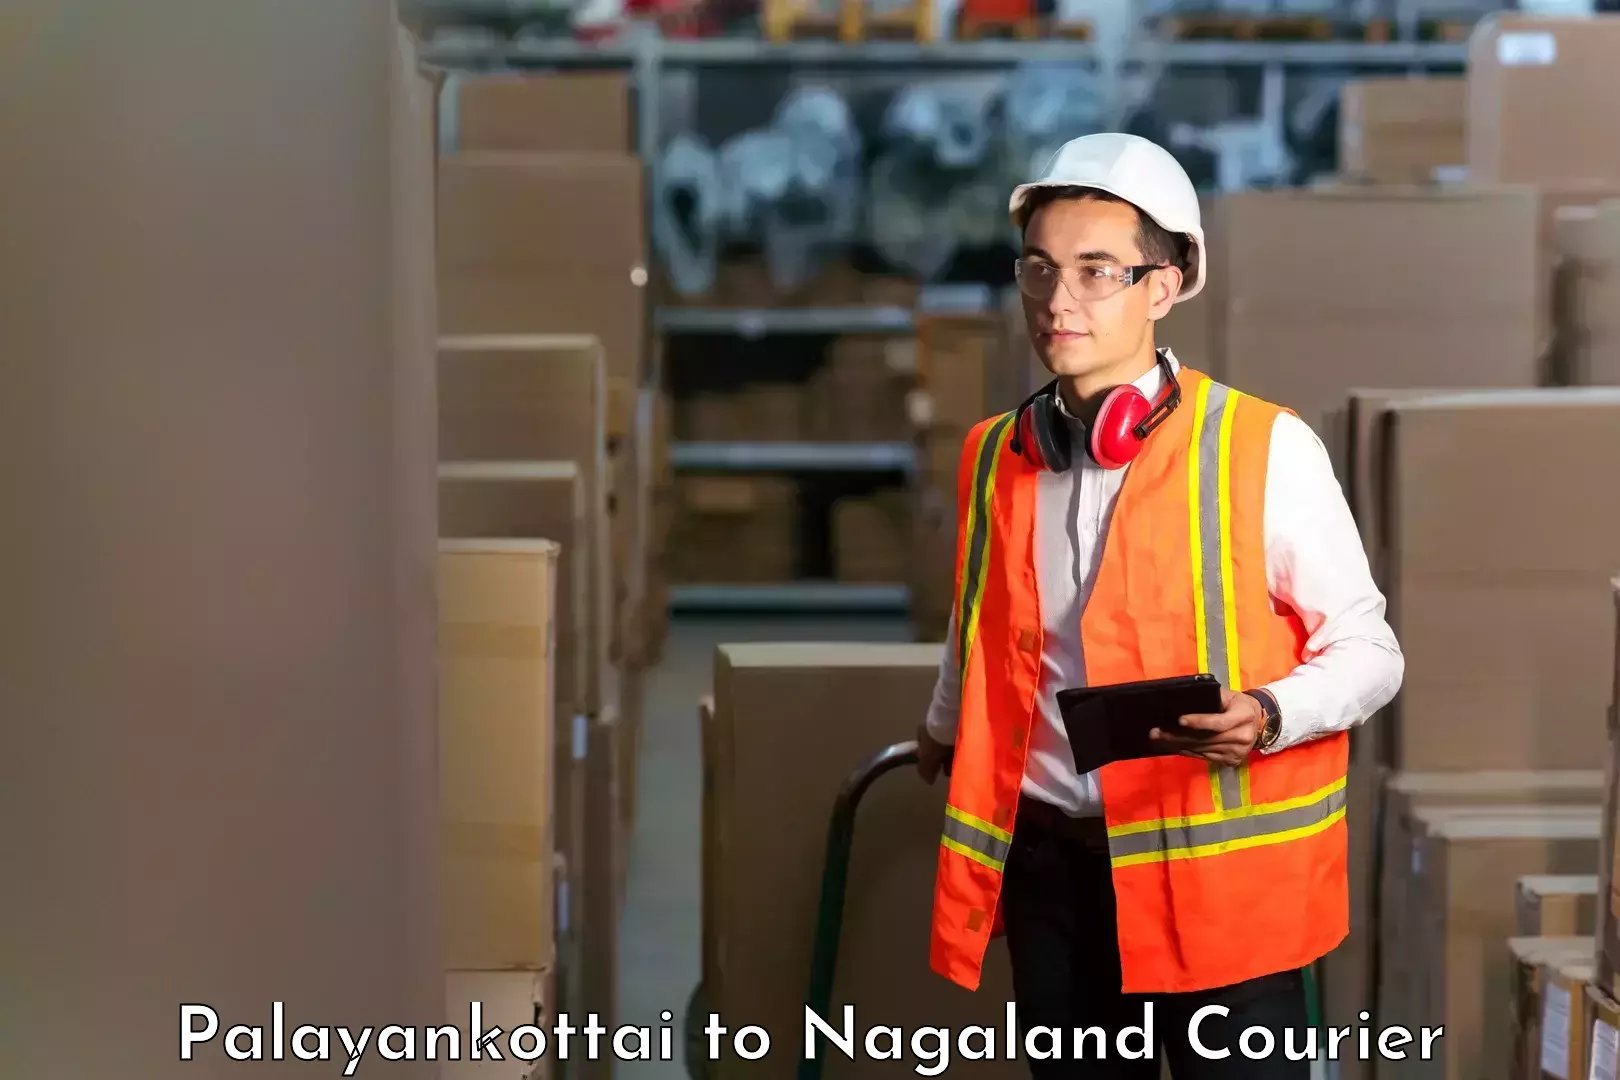 On-call courier service Palayankottai to Nagaland